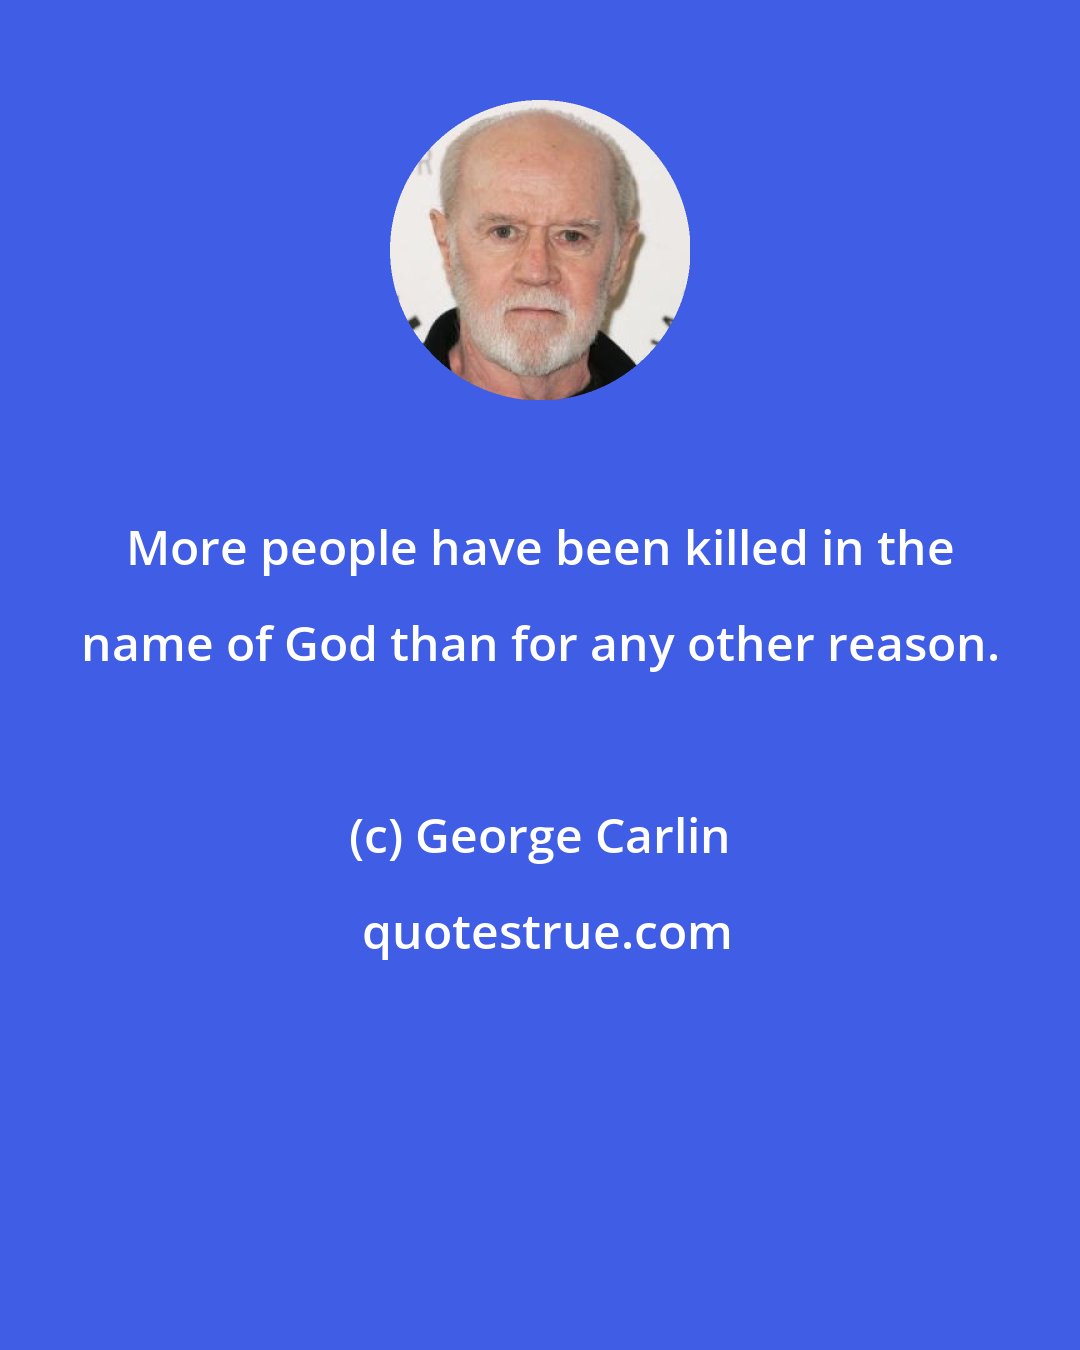 George Carlin: More people have been killed in the name of God than for any other reason.